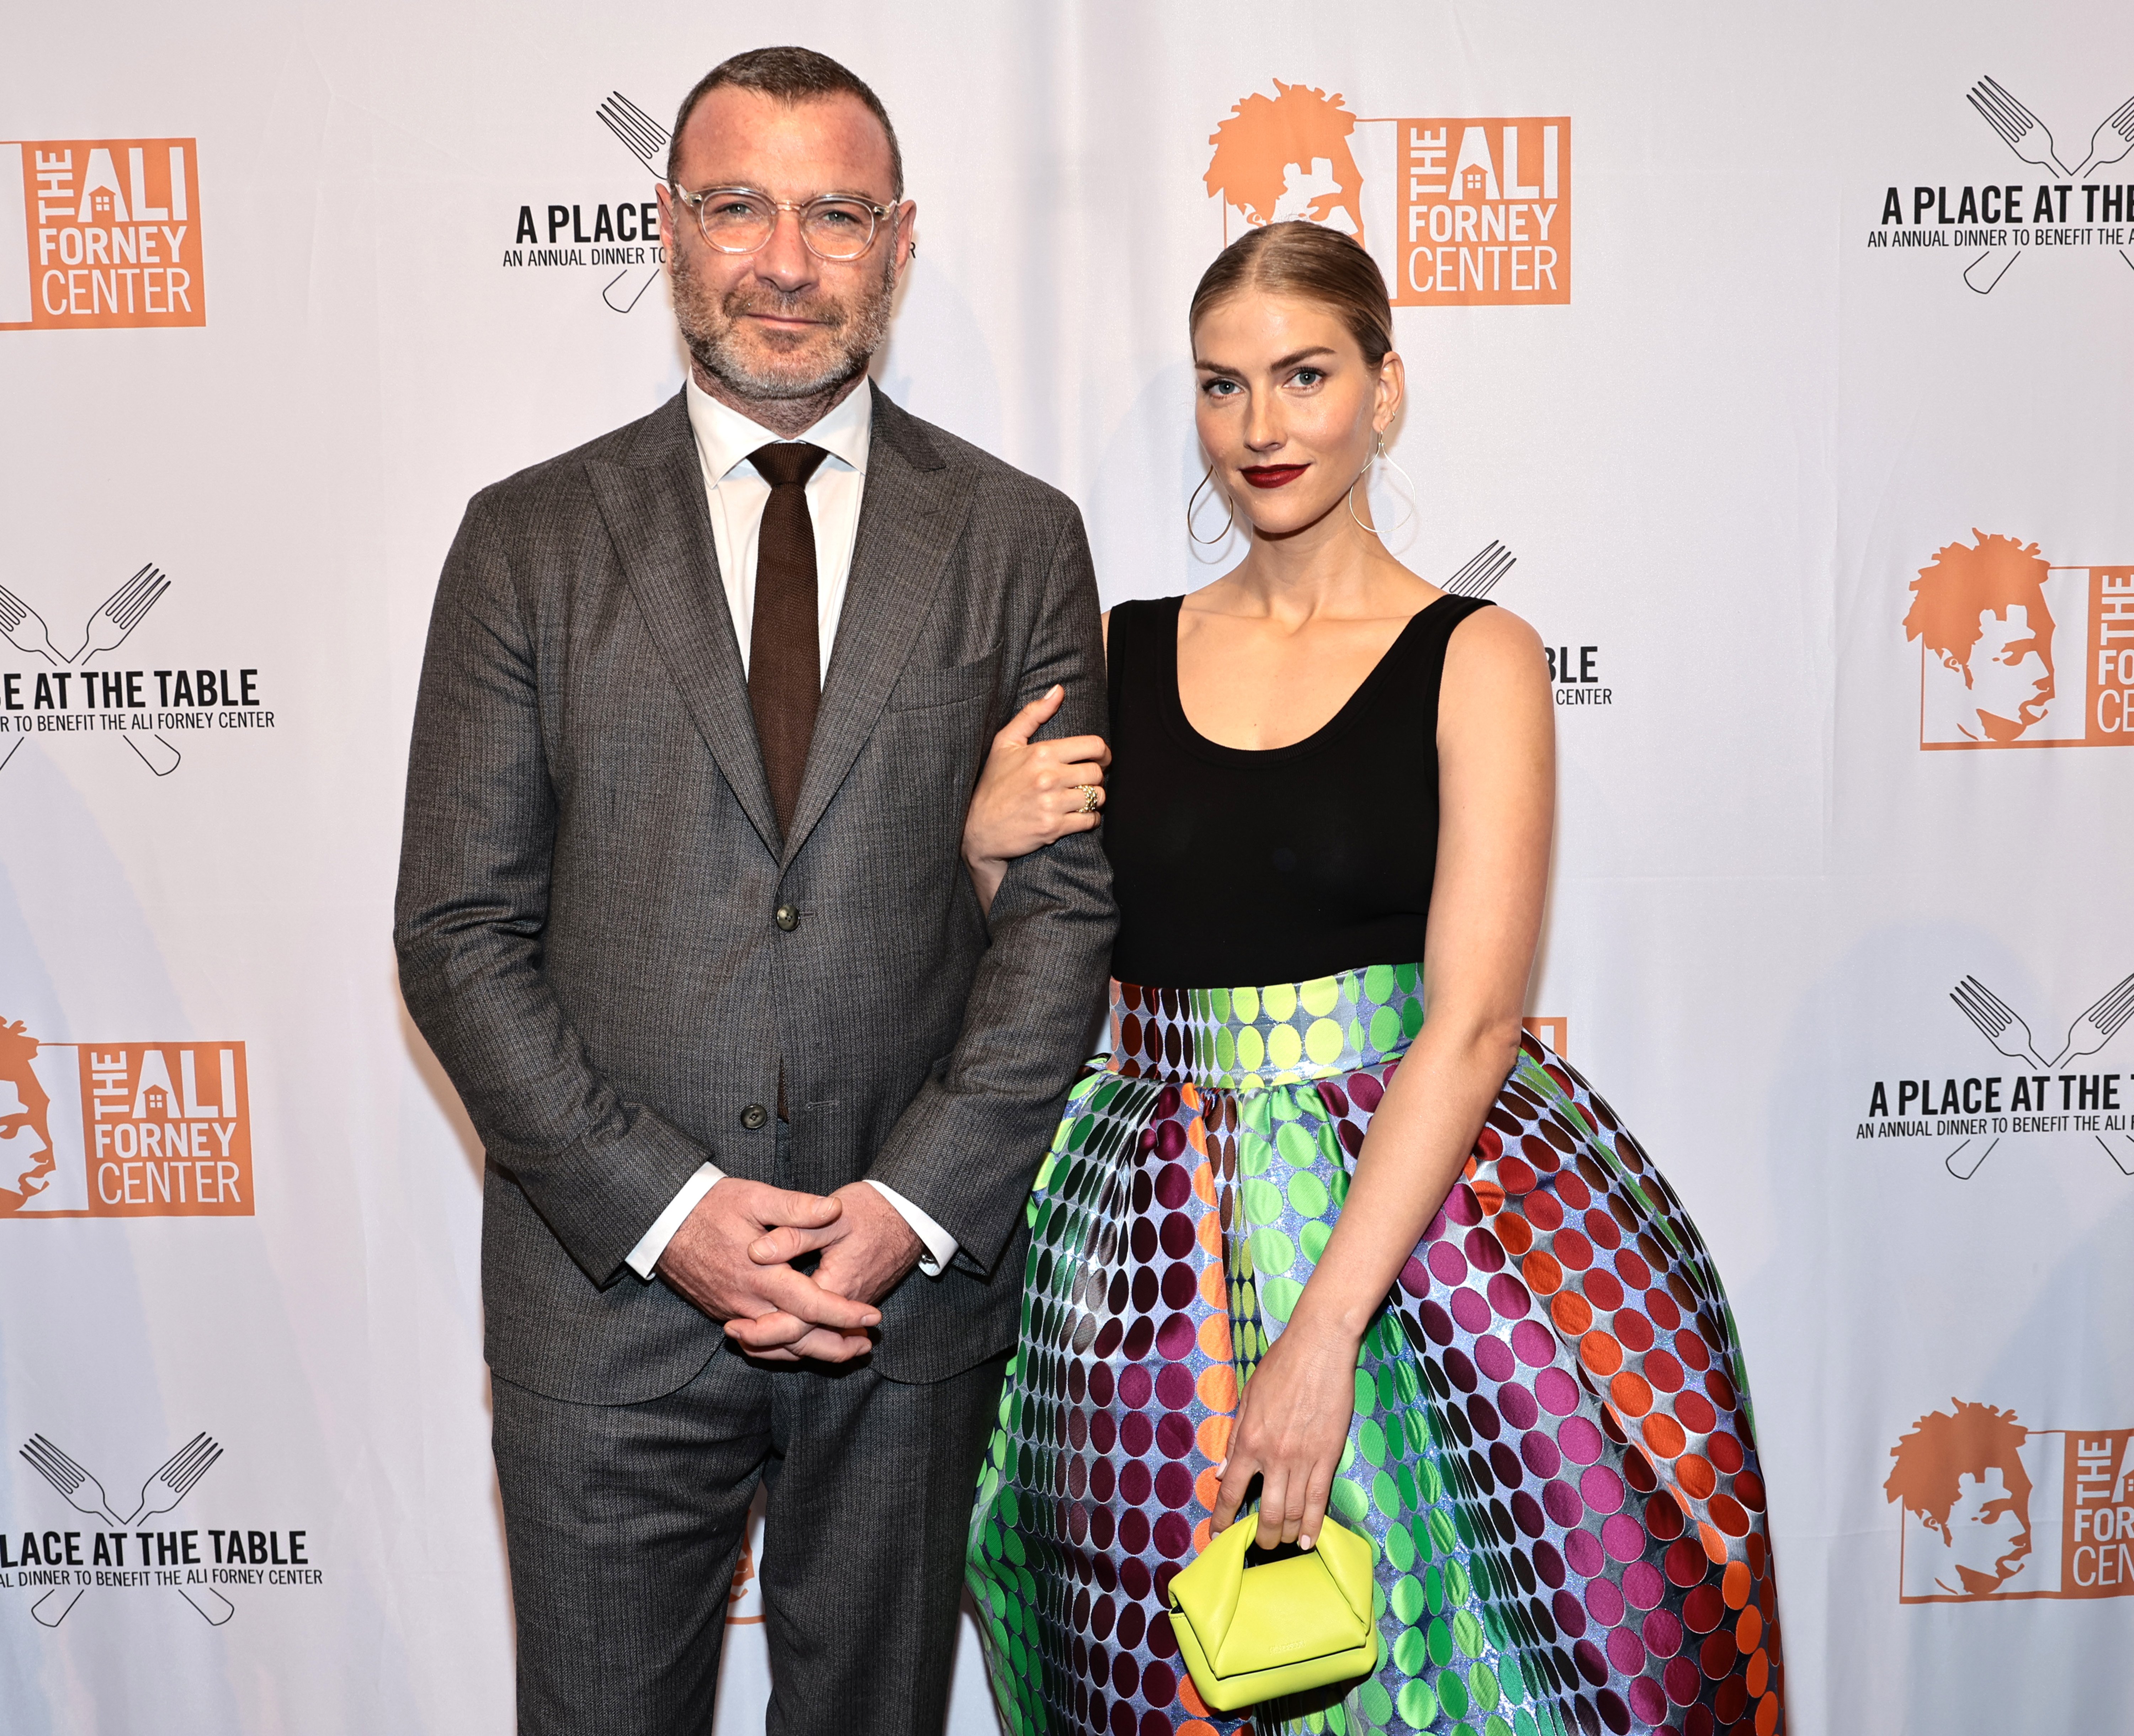 Liev Schreiber and Taylor Neisen at the Ali Forney Center's "A Place At The Table" Galaon May 13, 2022 in New York. | Source: Getty Images